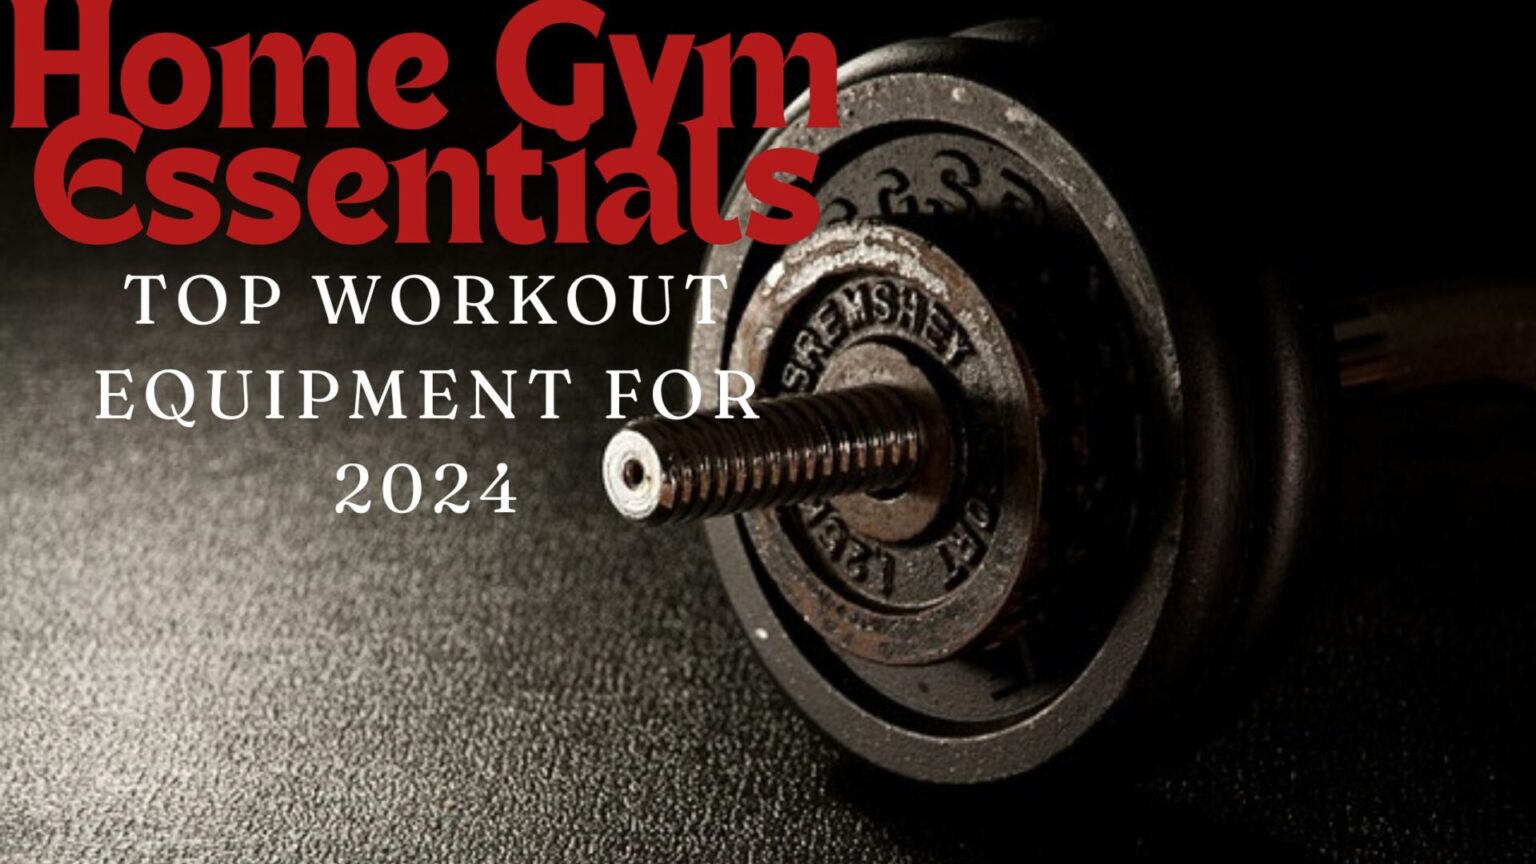 Home Gym Essentials: Top Workout Equipment for 2024